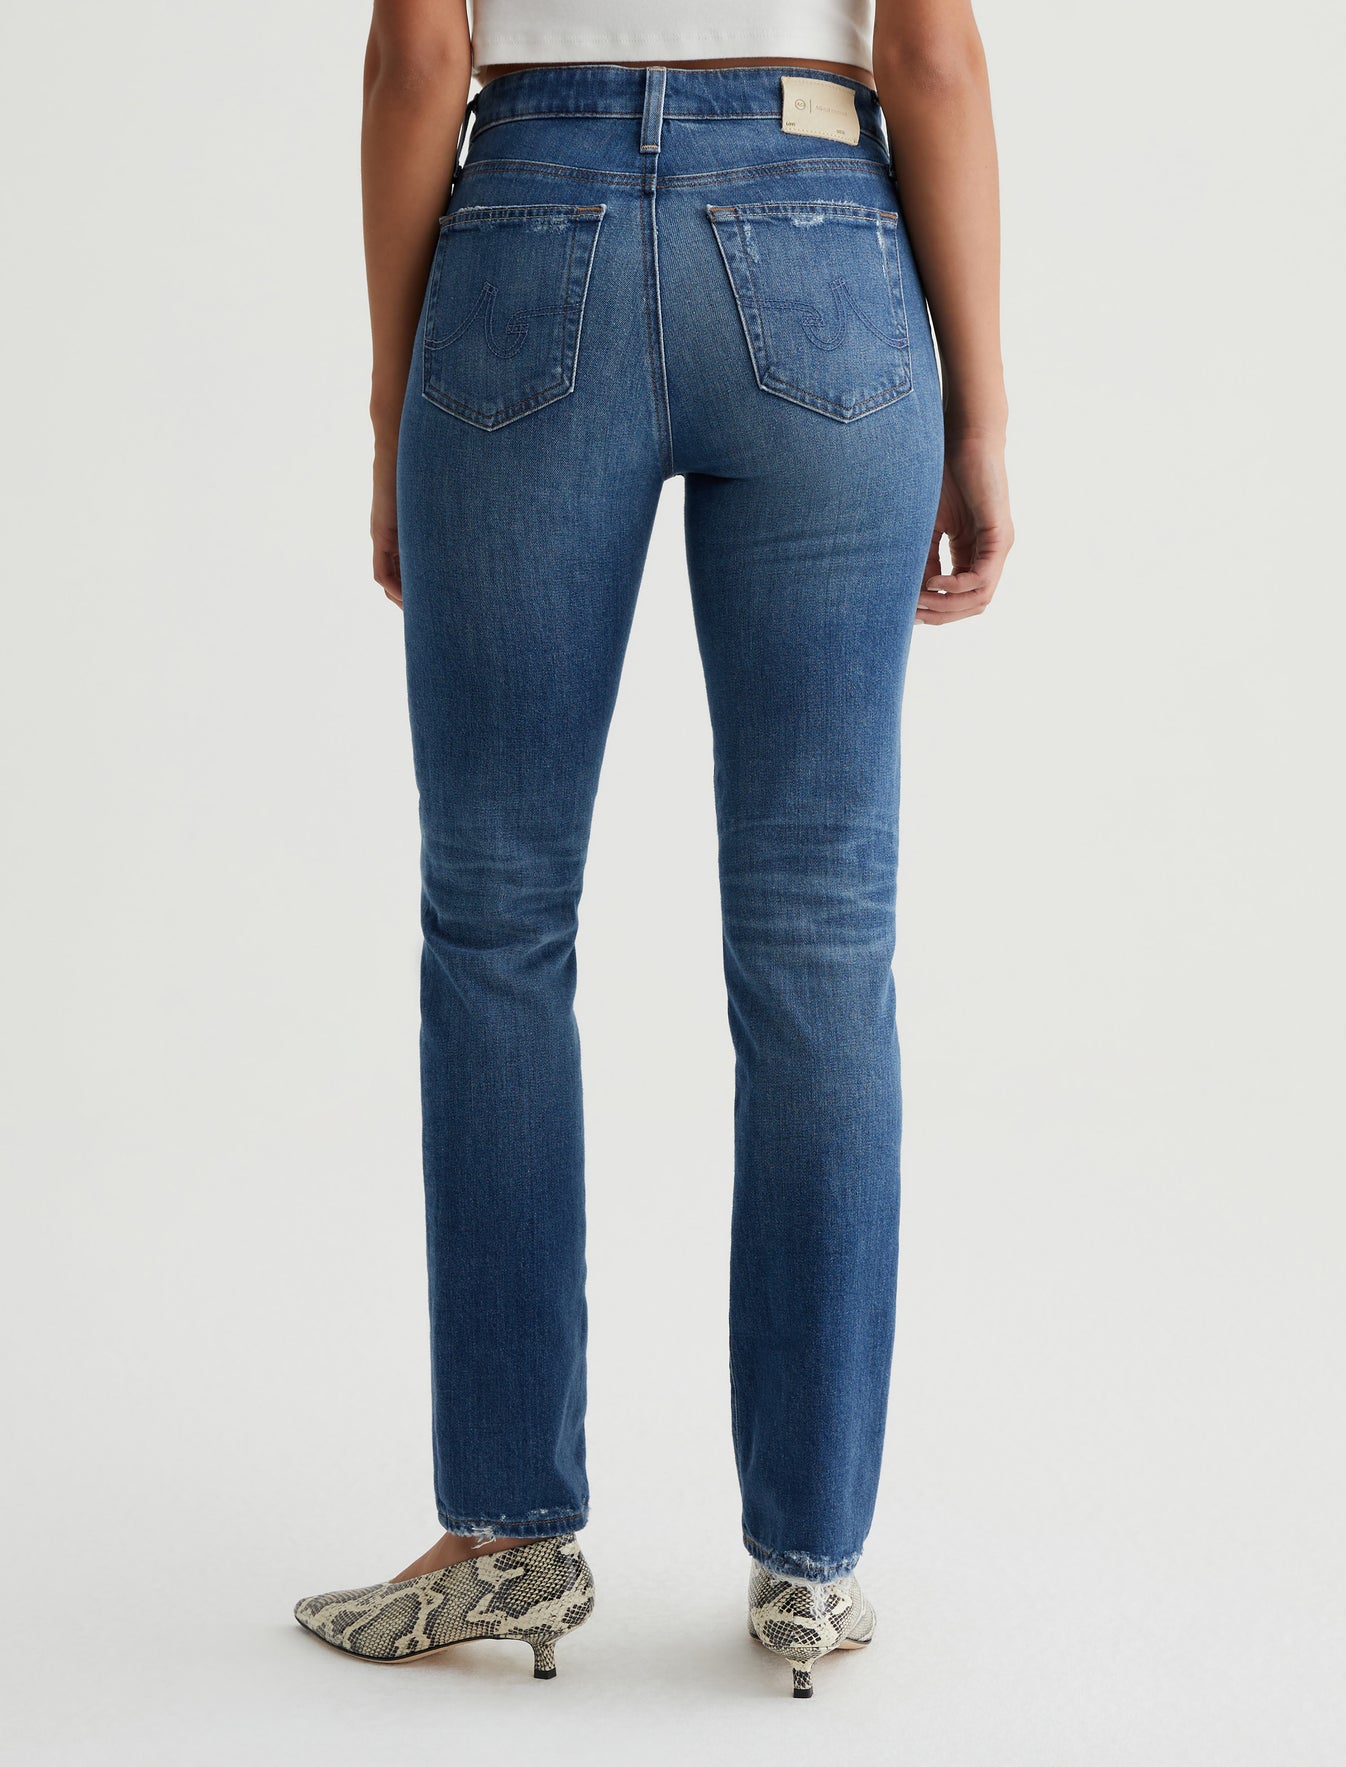 Women Years Jeans AG 14 Metaphor at Official Mari Store